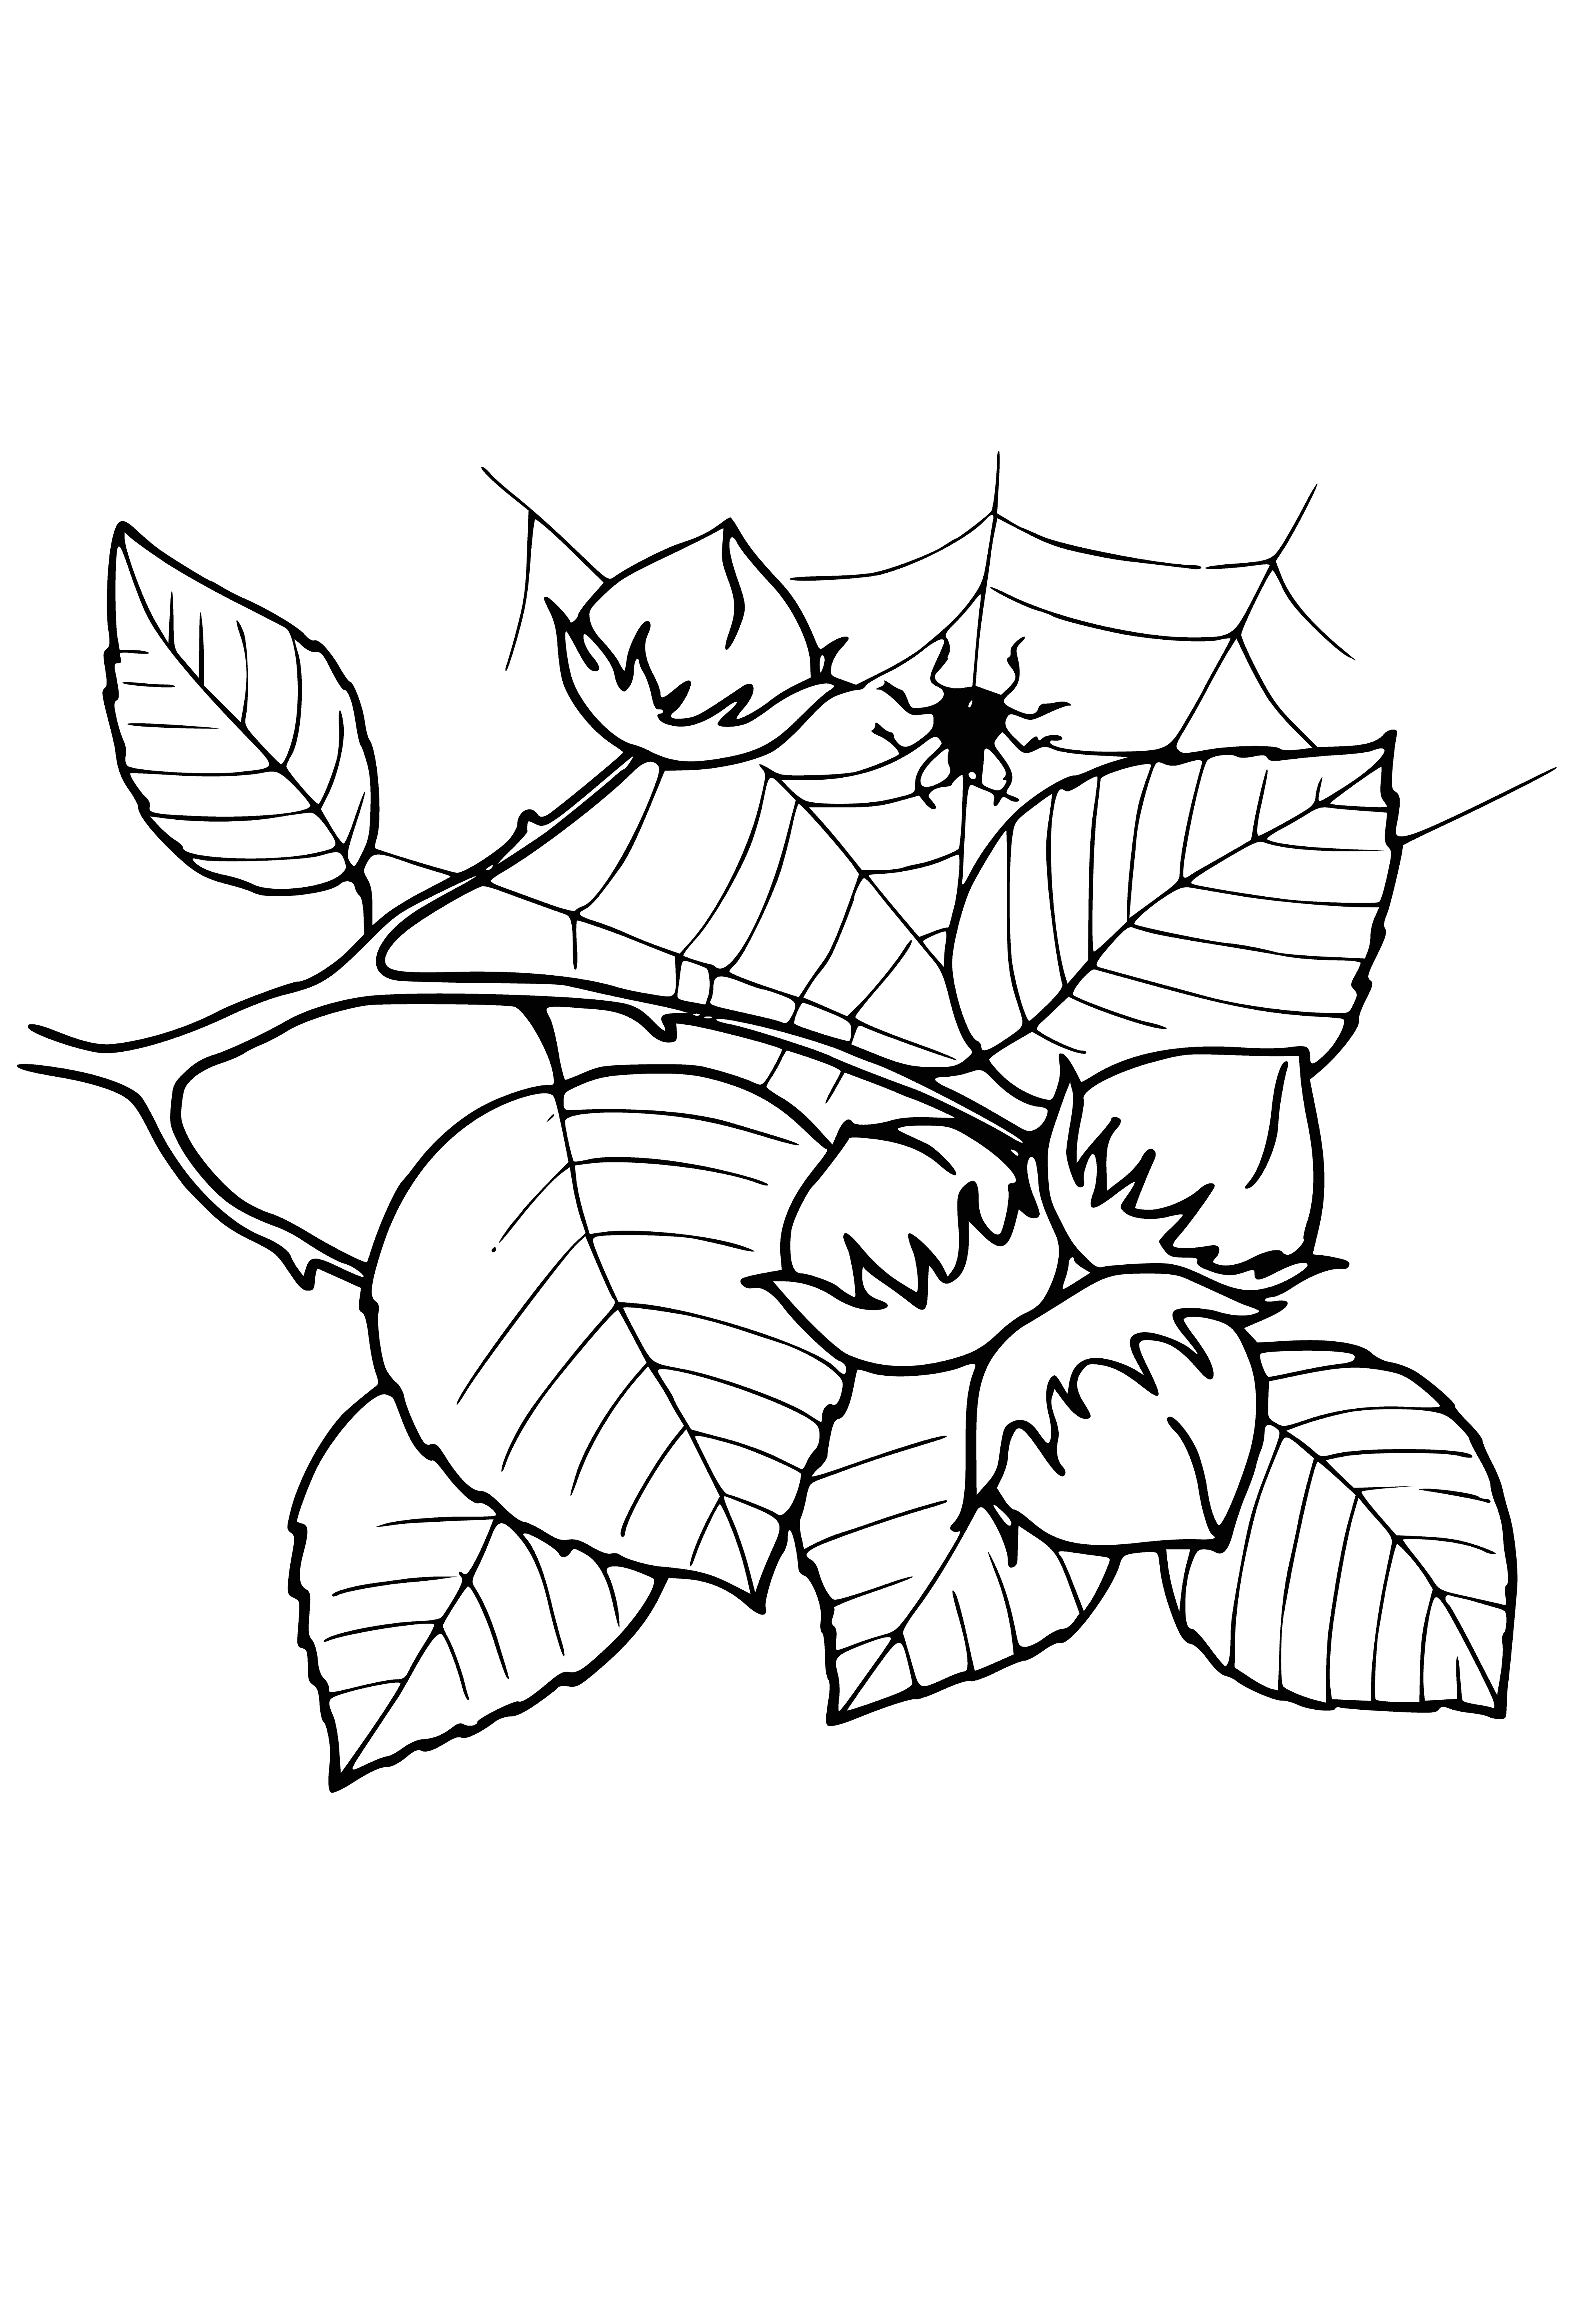 coloring page: Two light brown leaves & a small round dark brown fruit w/ hard shell. Inside is thin white layer & small brown edible seed. #Nature